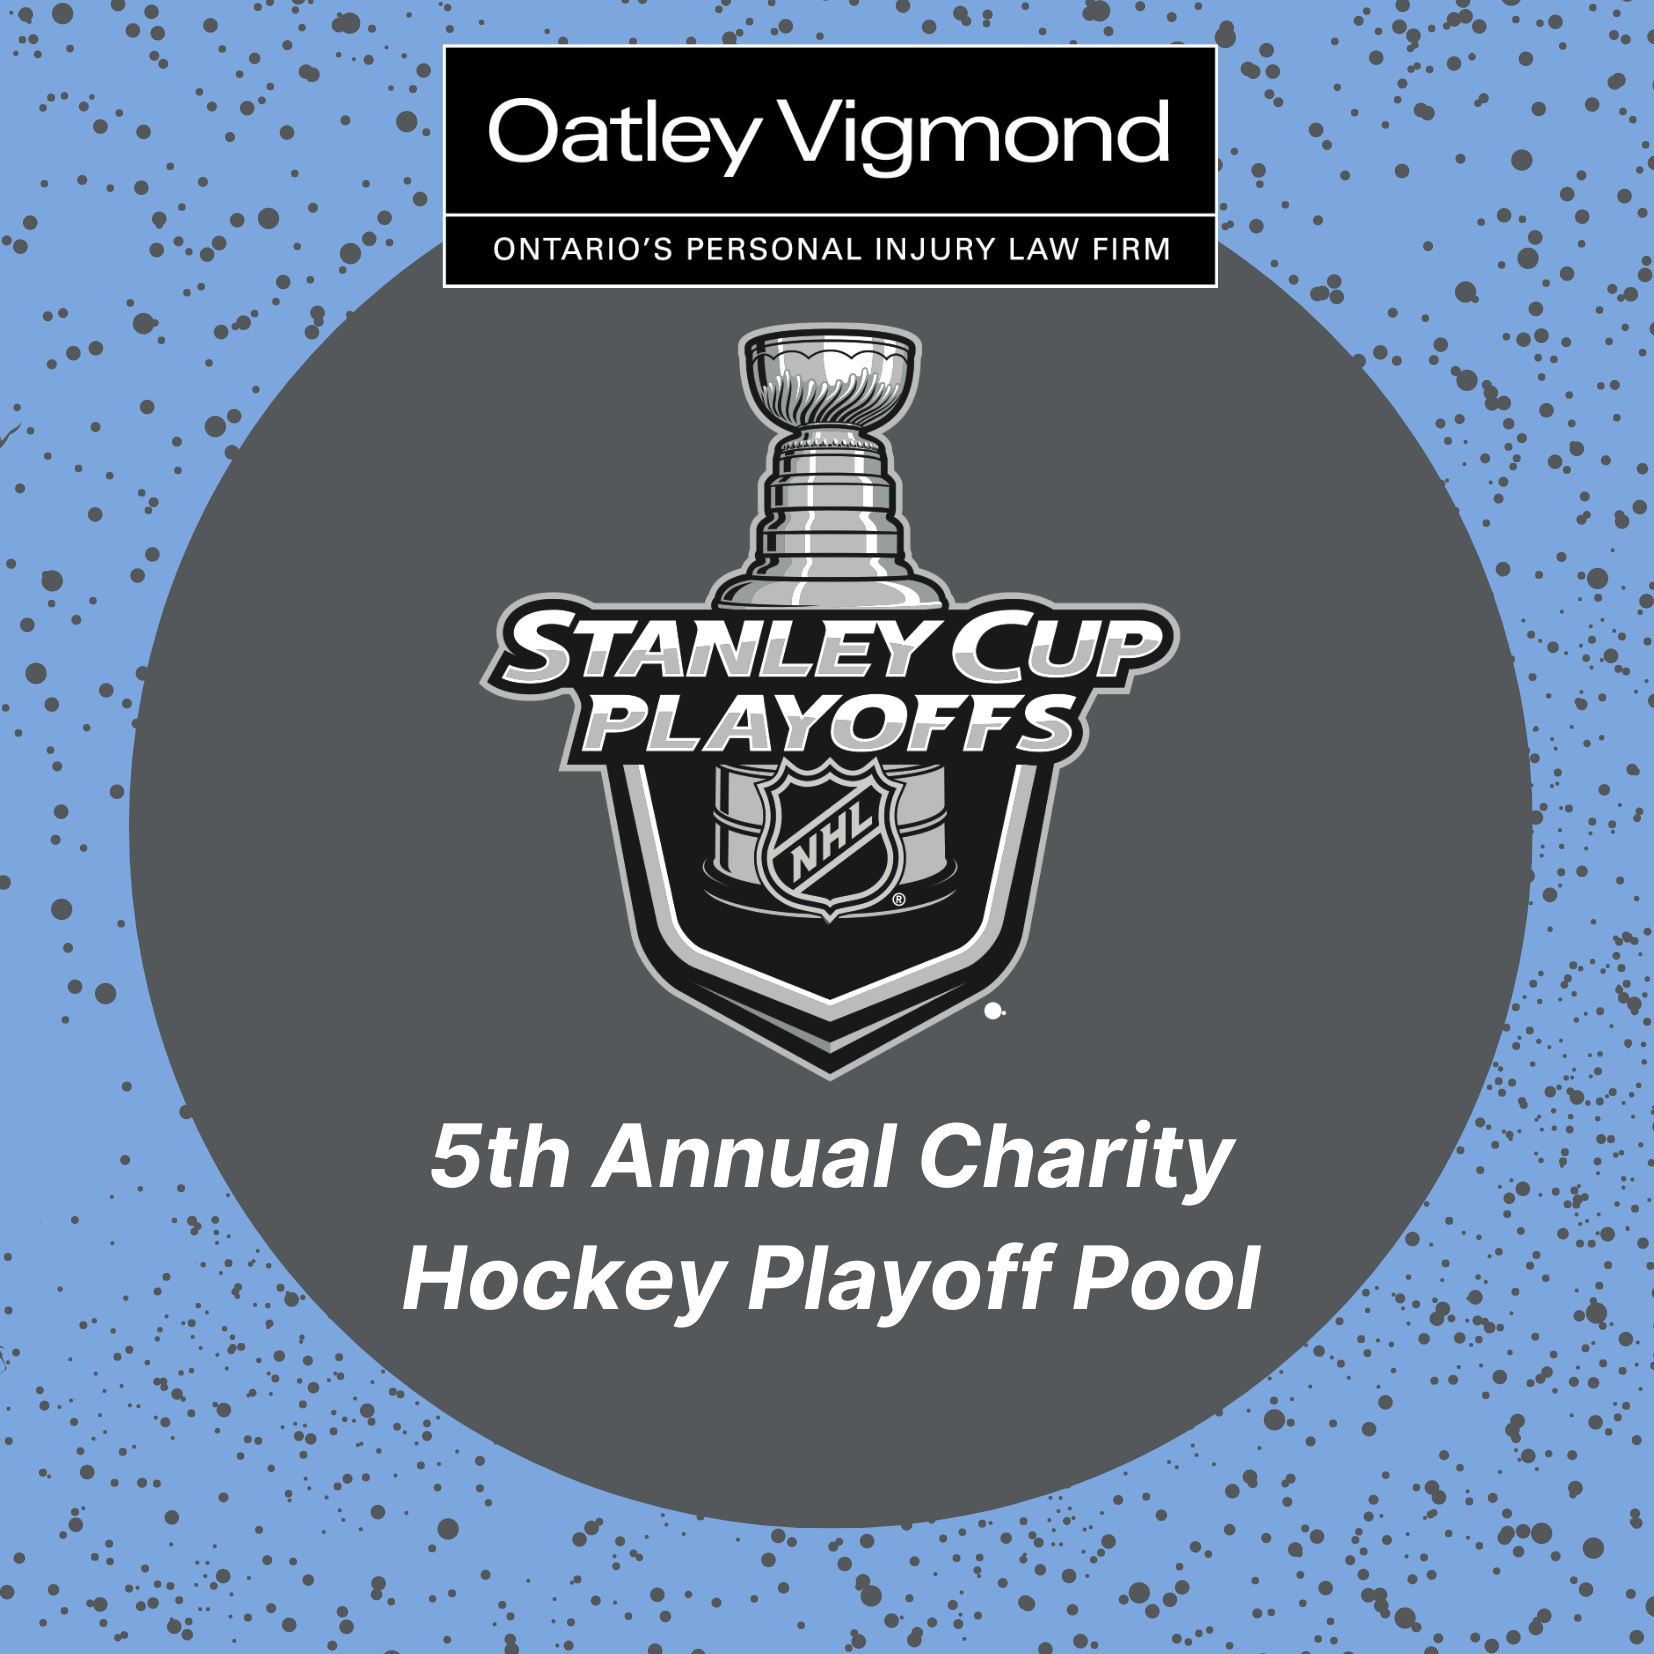 Register today for the 5th Annual Oatley Vigmond Charity Hockey Pool